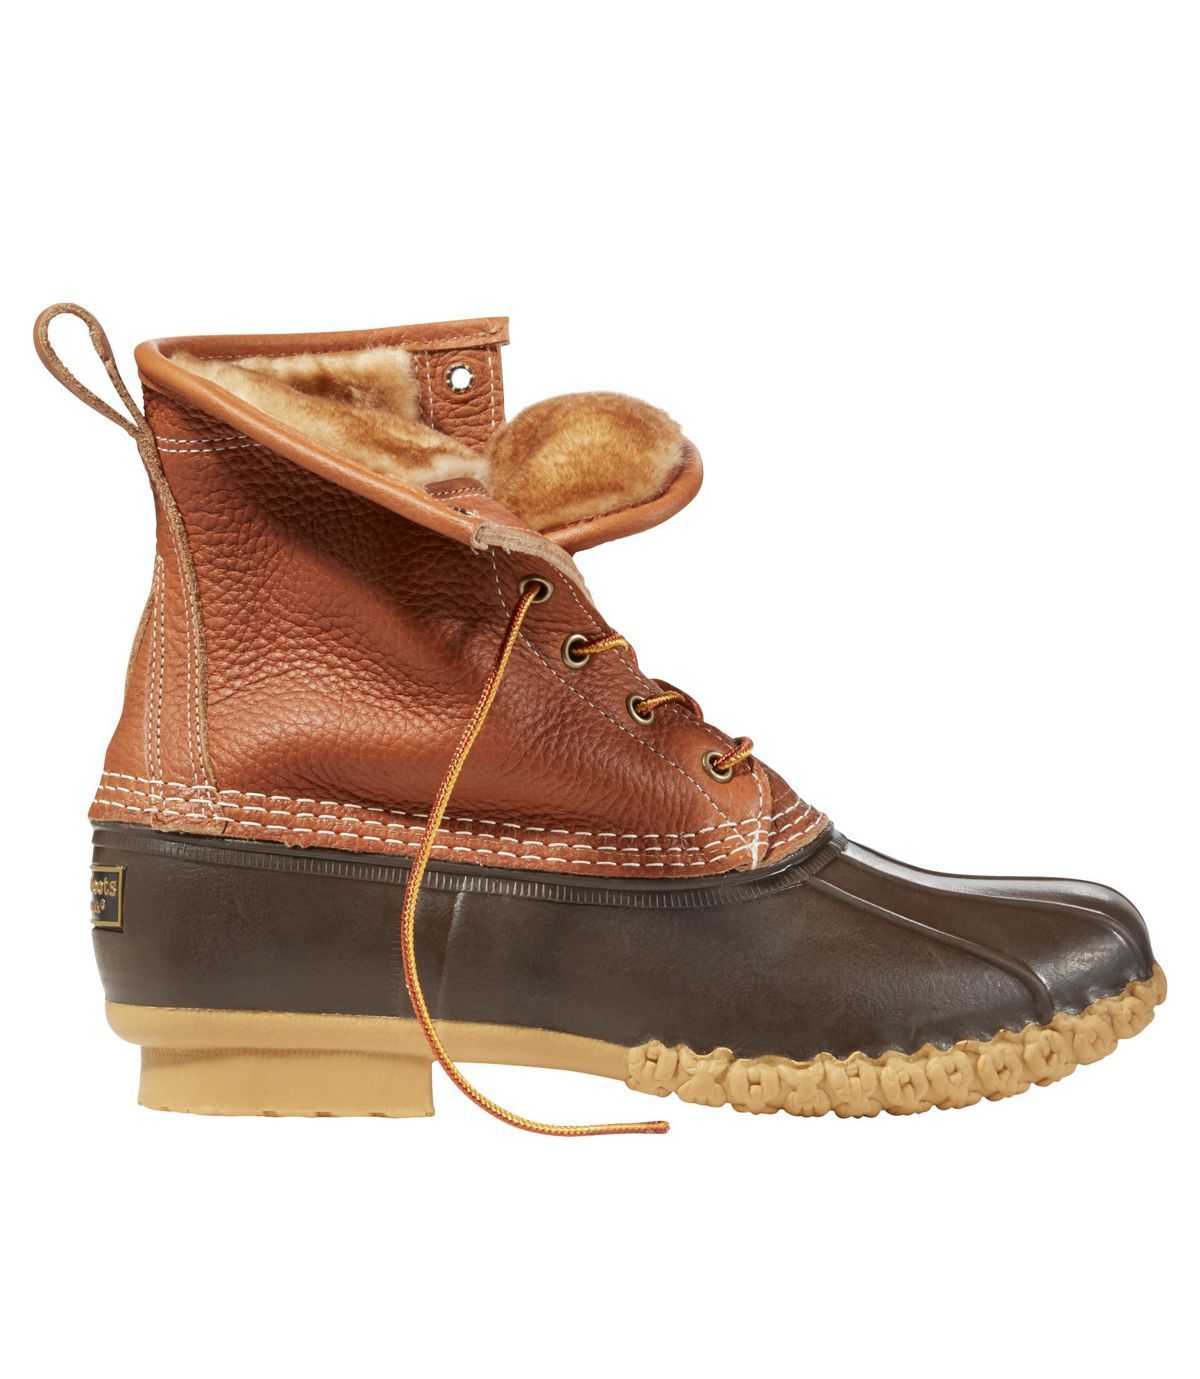 8" Shearling-Lined Bean Boot